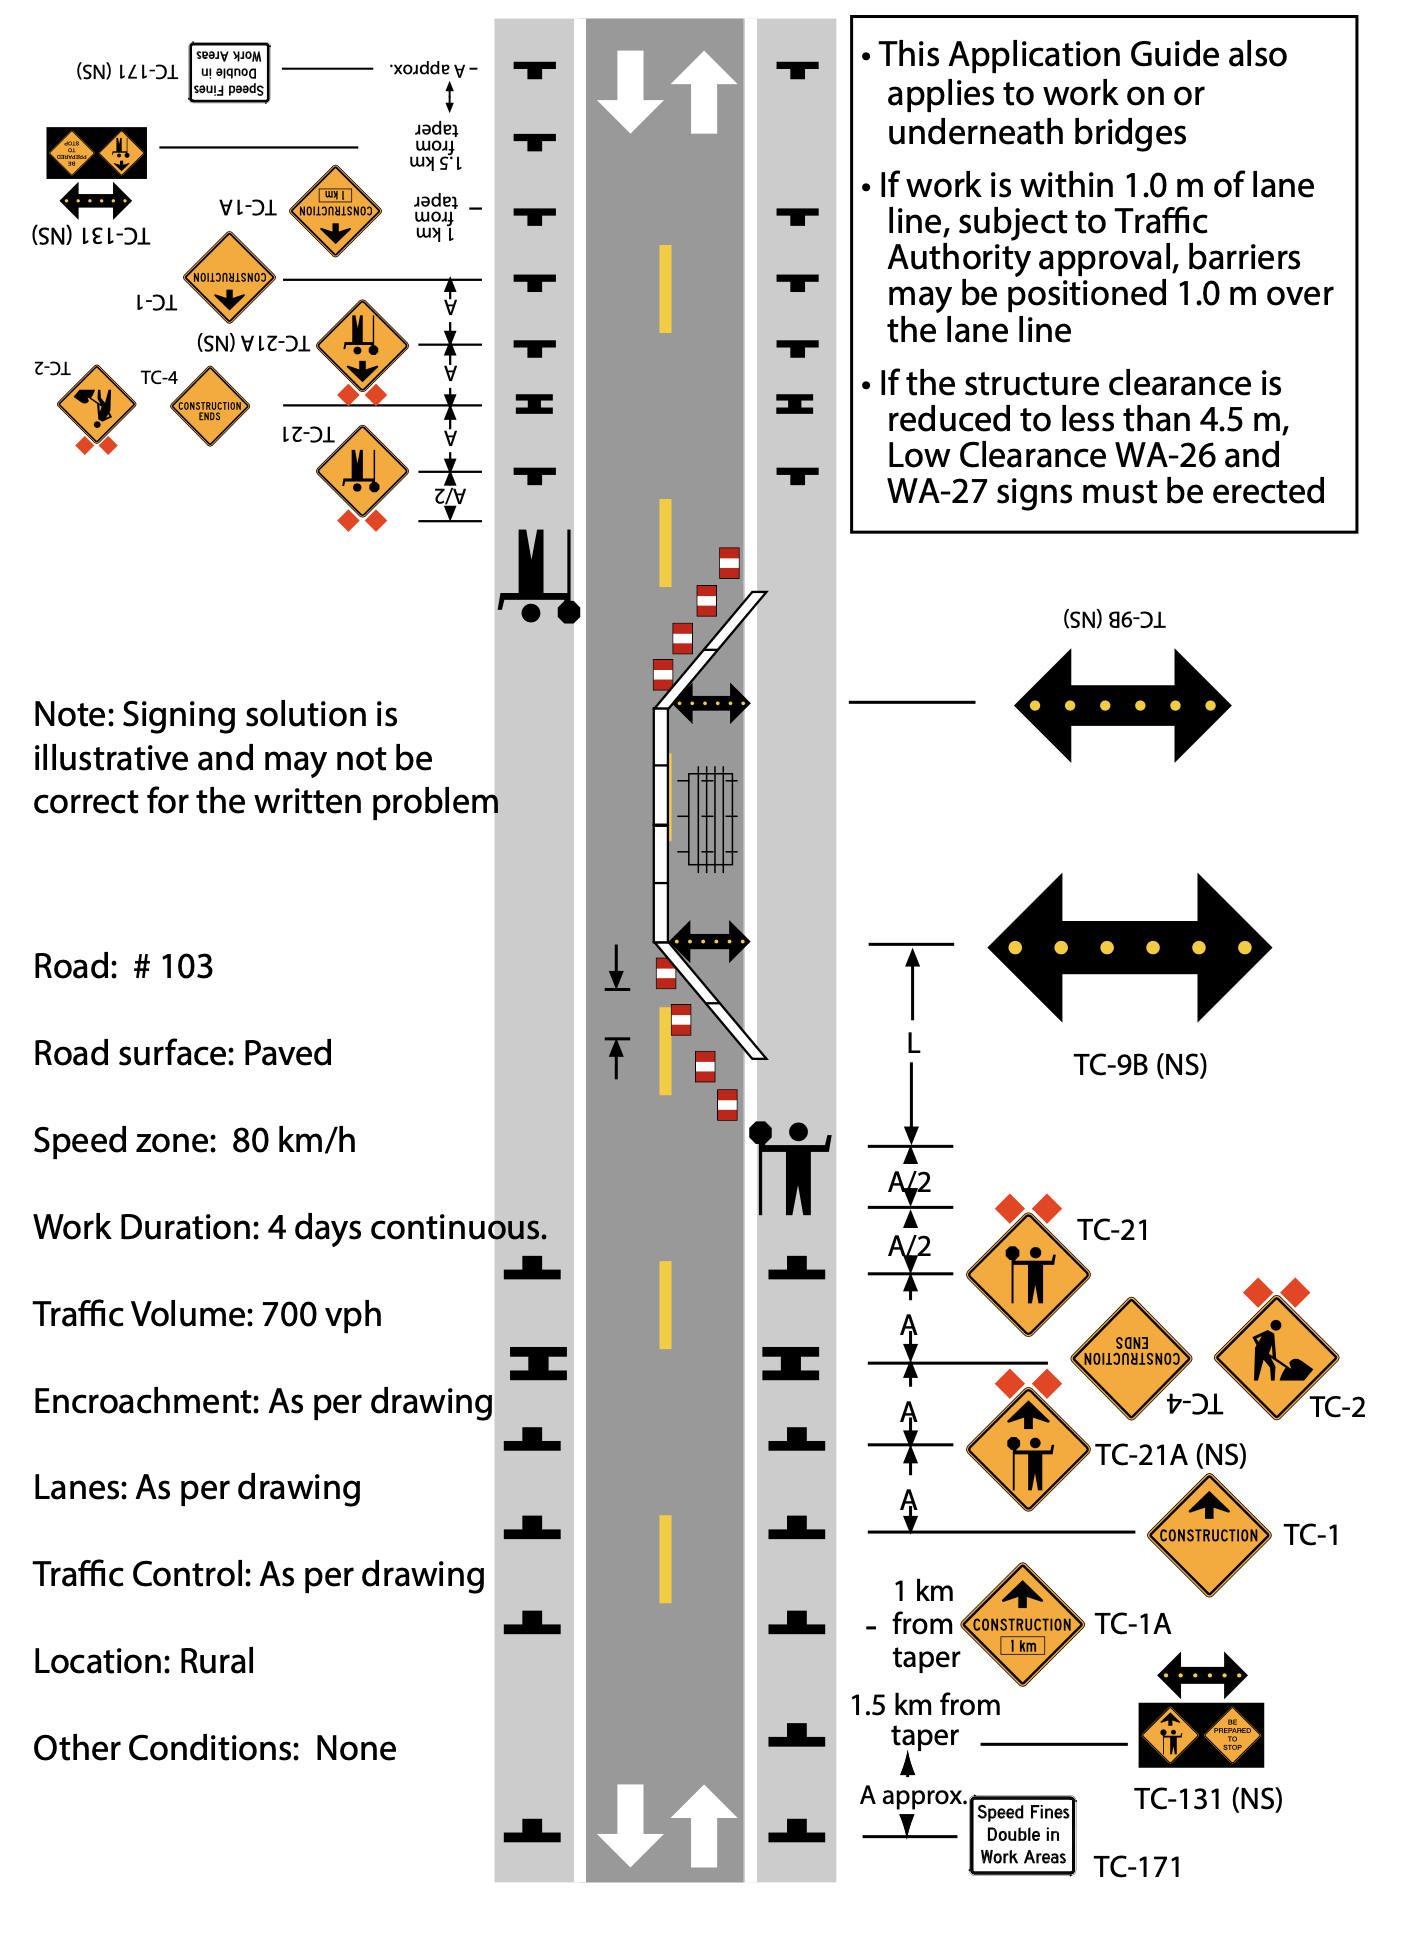 A schematic of a road indicating sign and device placements, and details about the road, surface, work duration, and encroachment